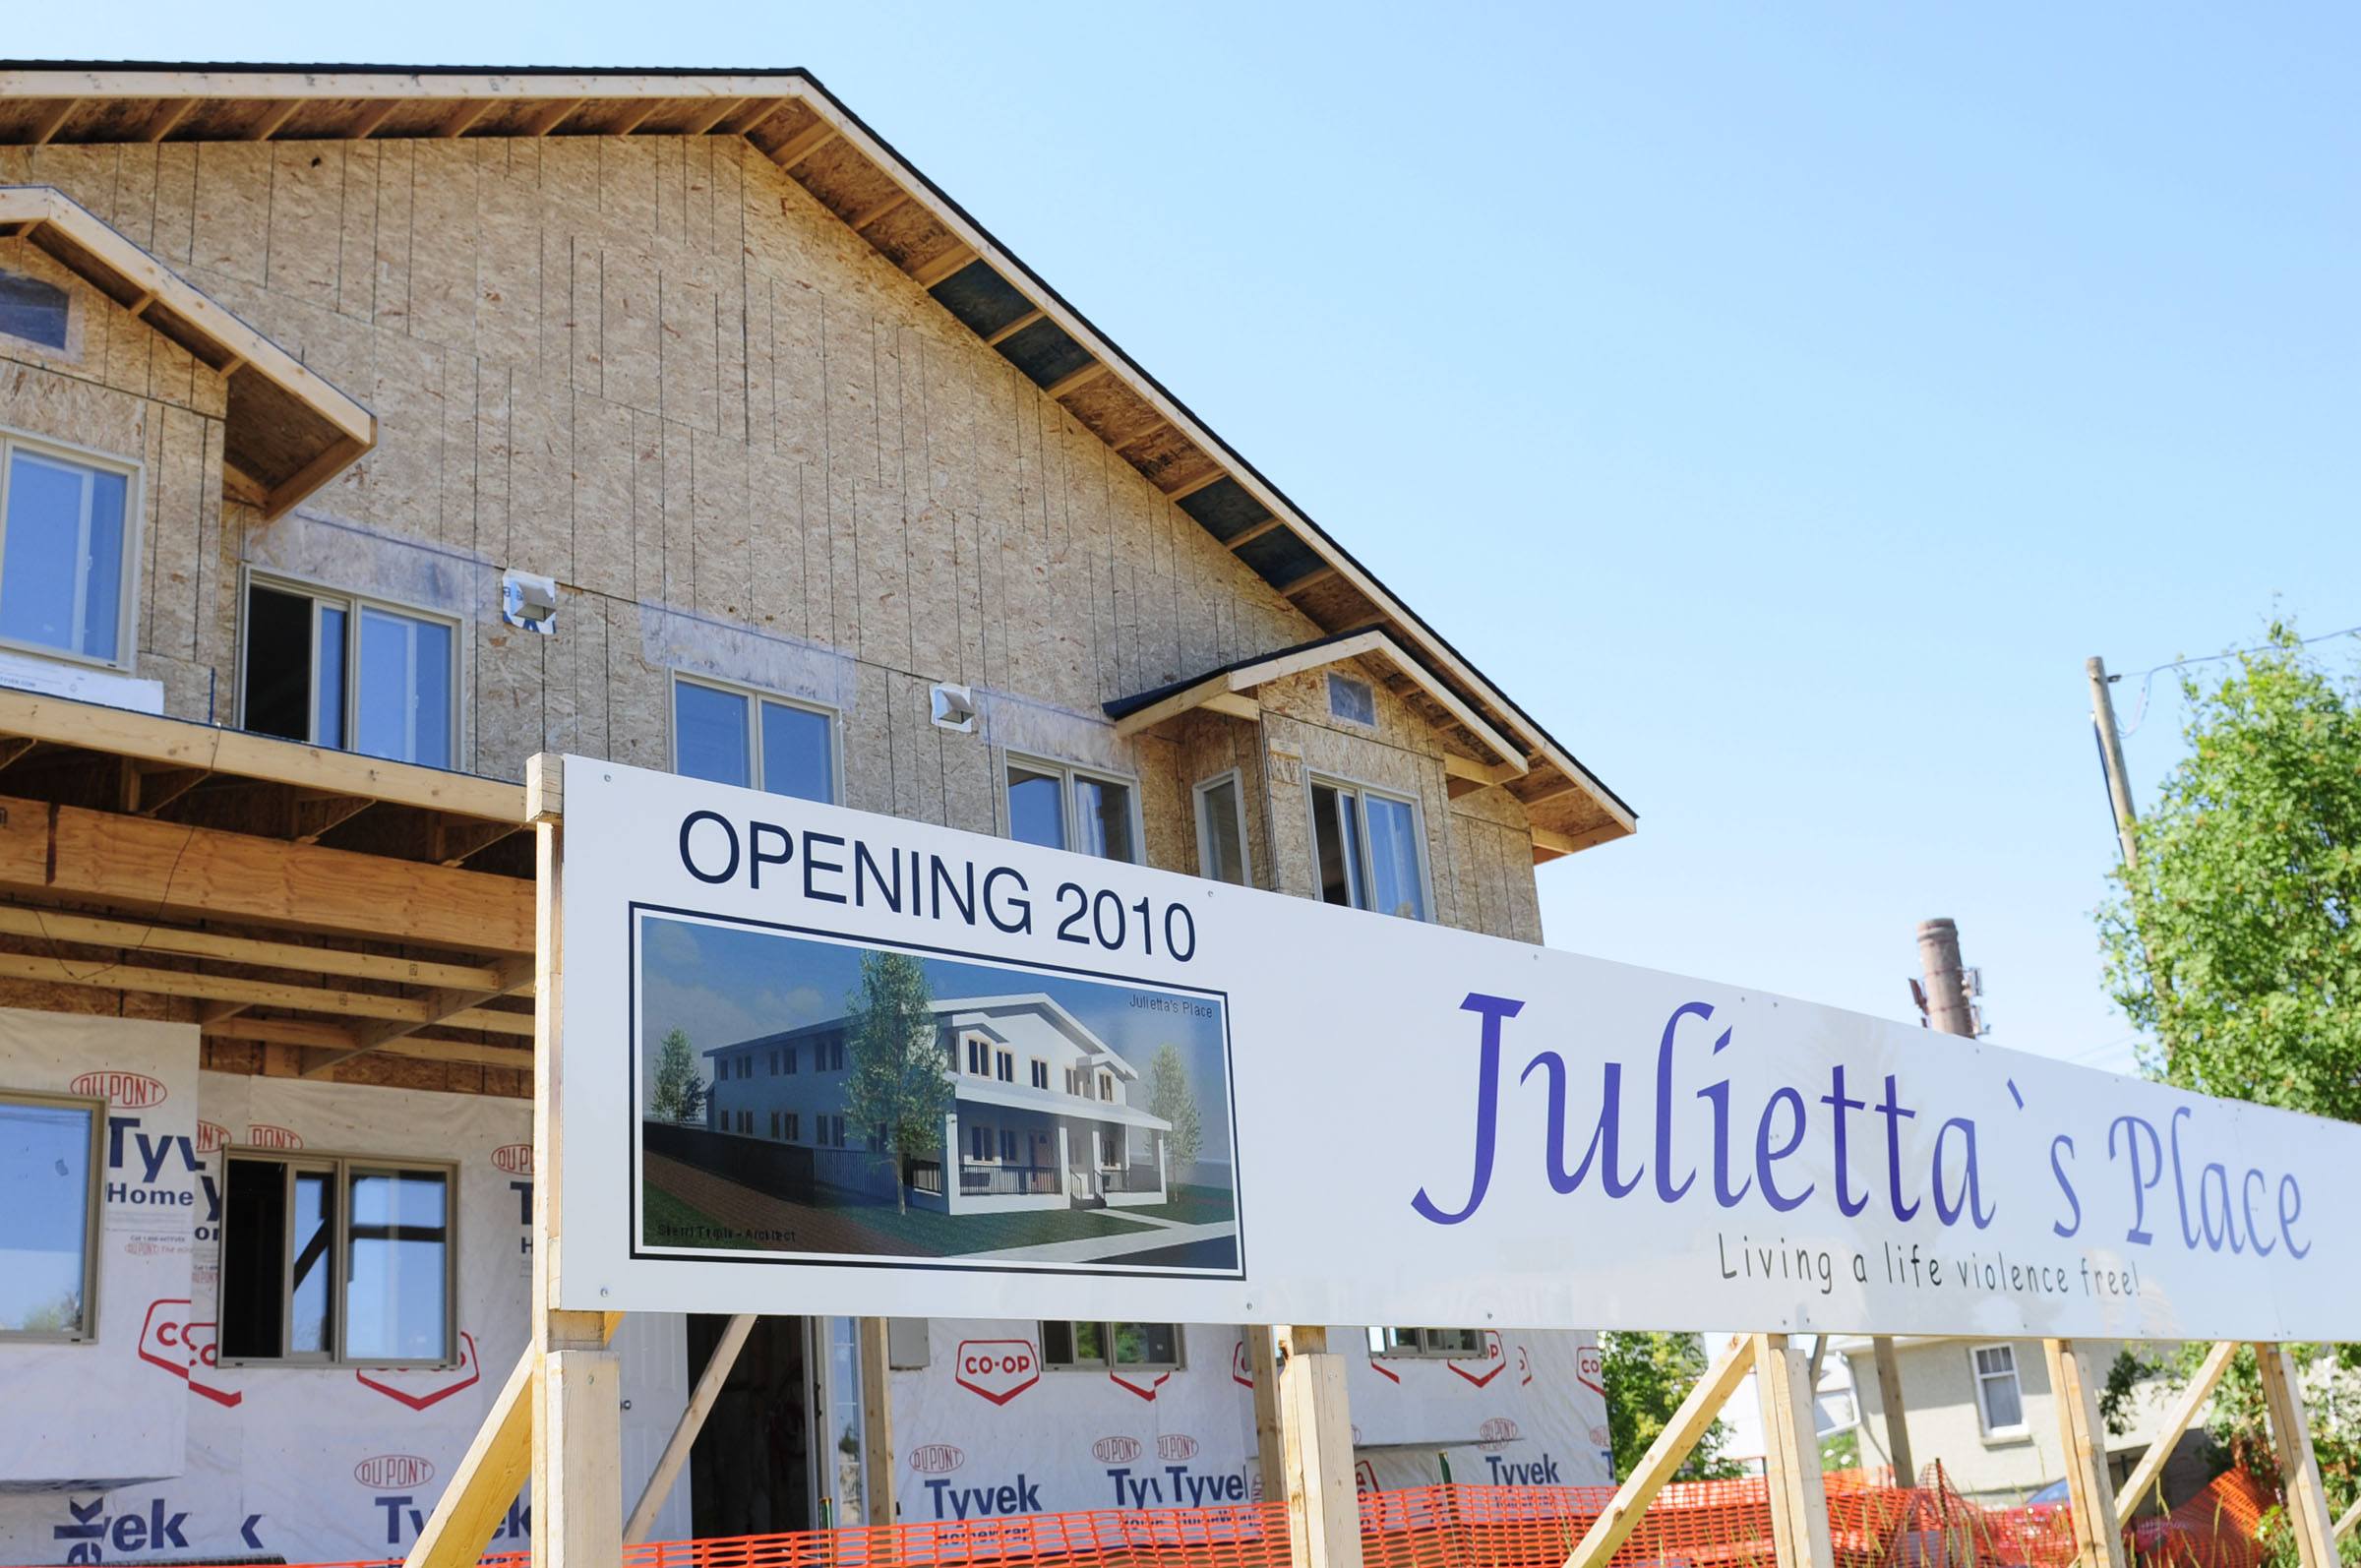 Julietta's Place will provide affordable housing for women and children escaping domestic violence. The facility is expected to open in October.